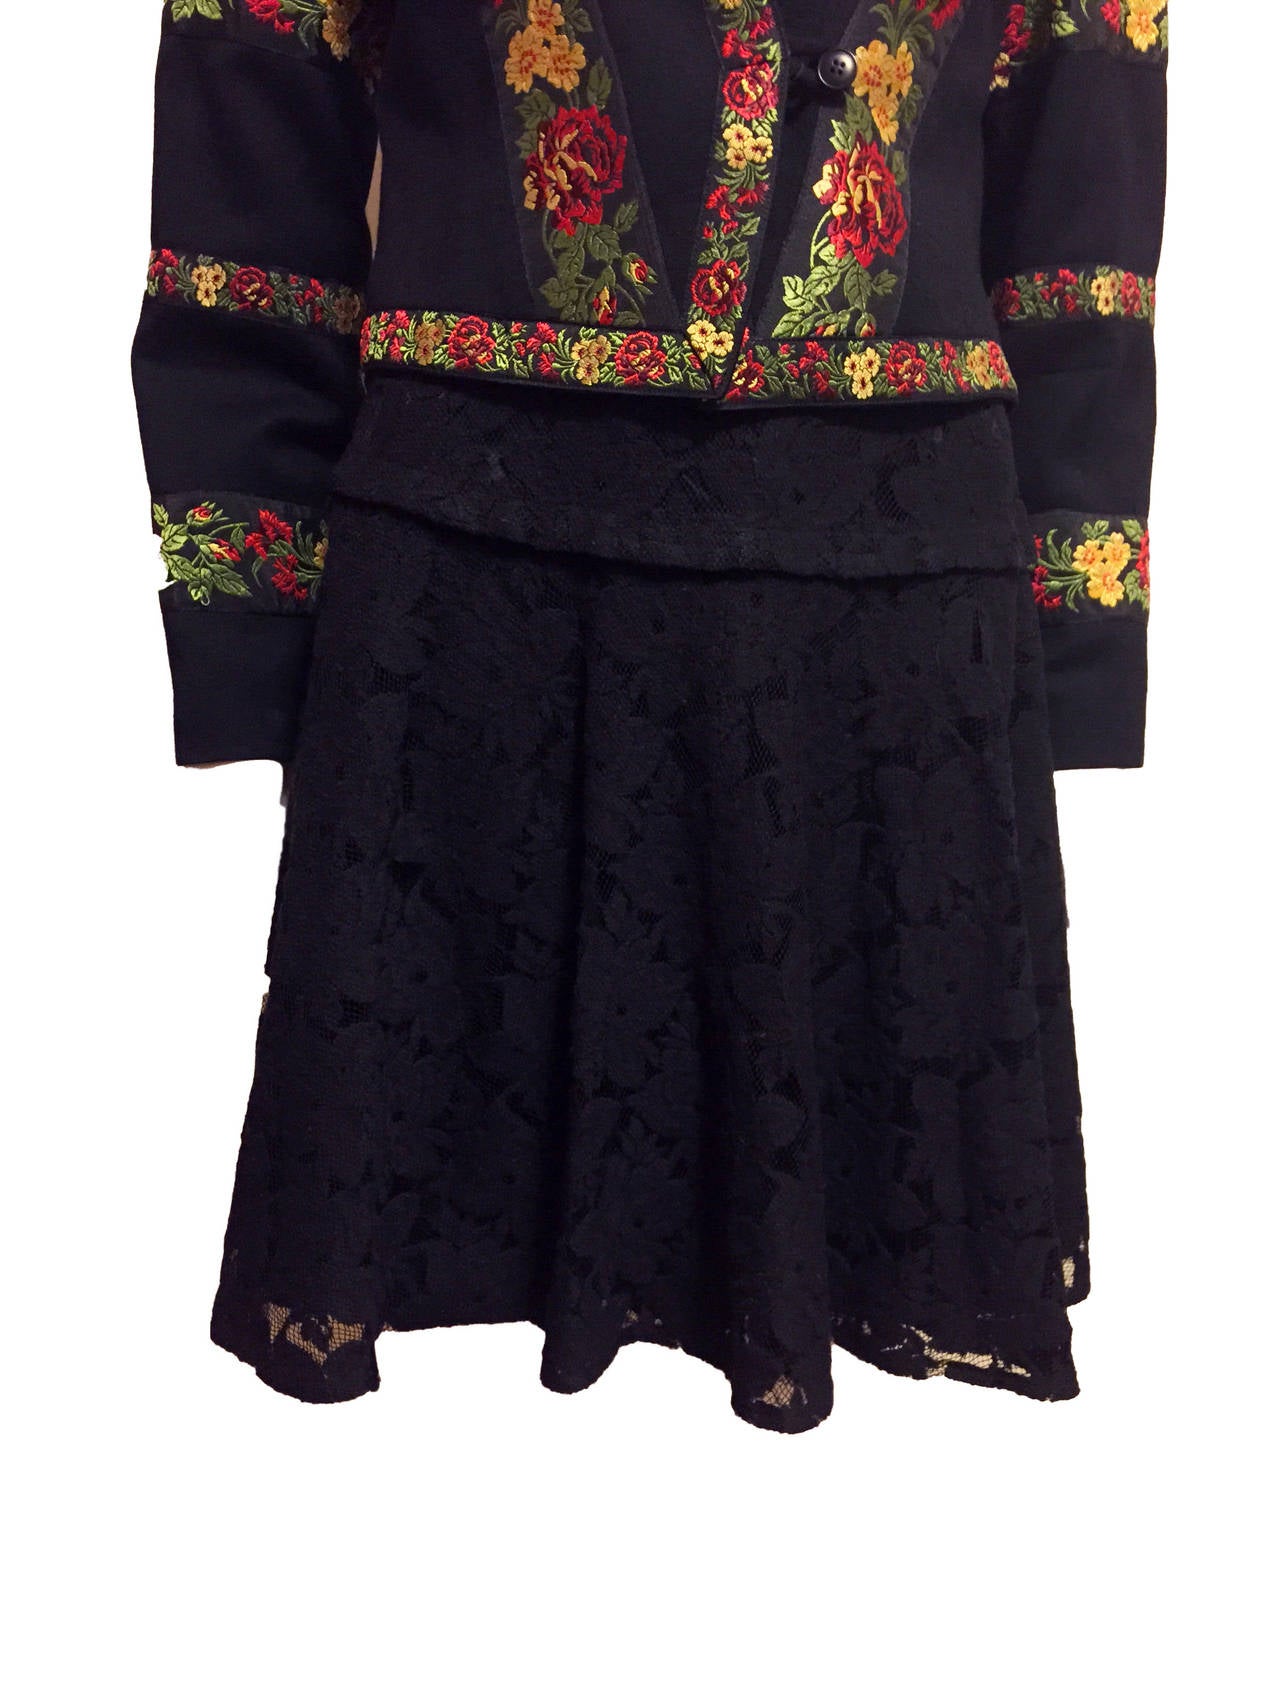 Rare Kenzo Folkloric Inspired Jacket and Lace Skirt In Excellent Condition For Sale In Bethesda, MD